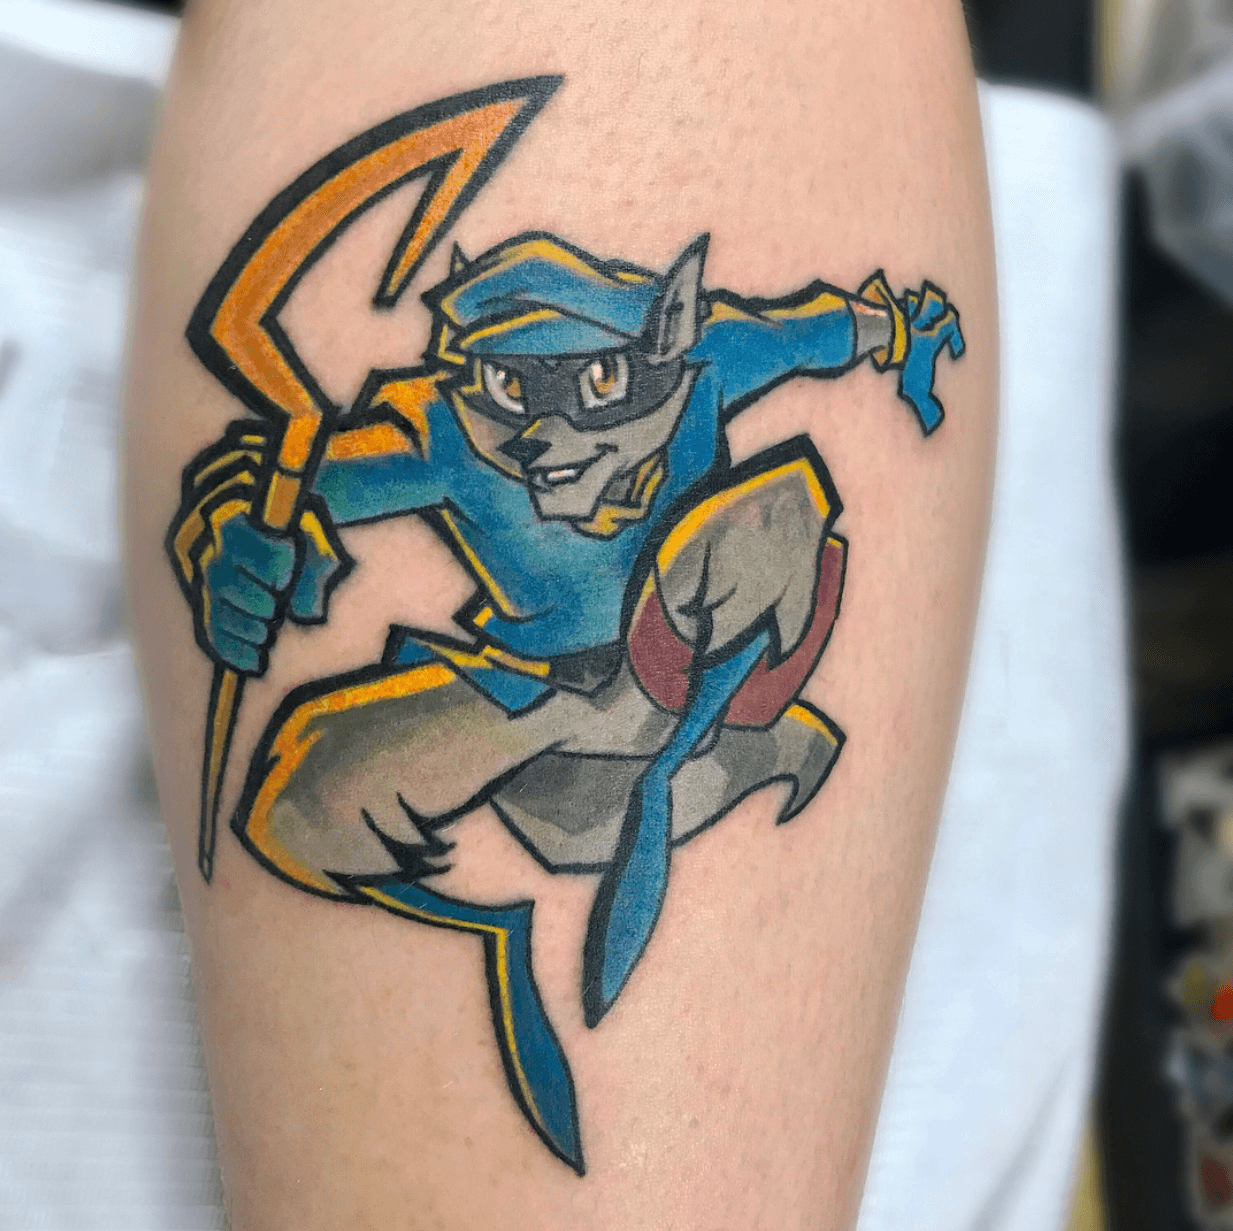 I had the Sly Cooper Cane done yesterday By Jesper Hochloff at Iron  Ink  Vejle Denmark  Gaming tattoo Gamer tattoos Tattoos